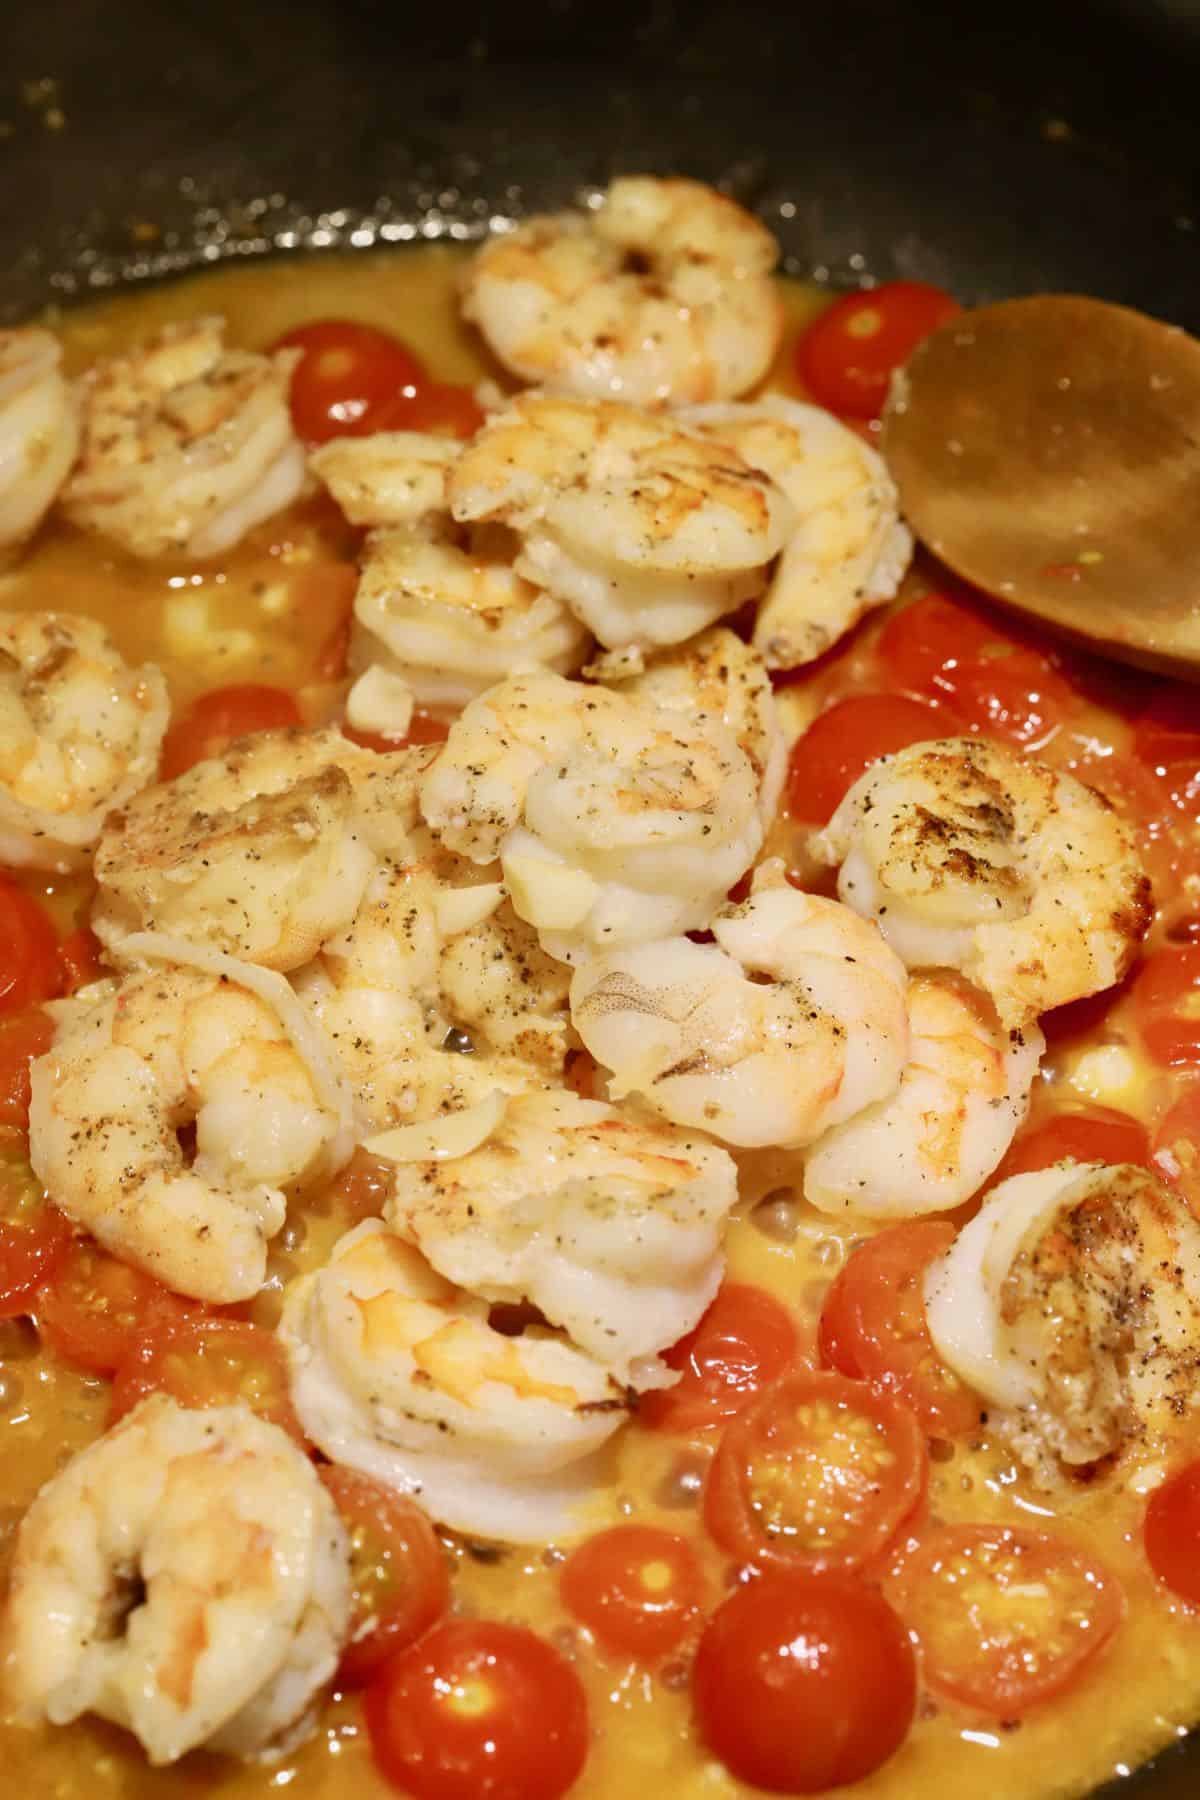 Shrimp and cherry tomatoes cooking in a skillet.